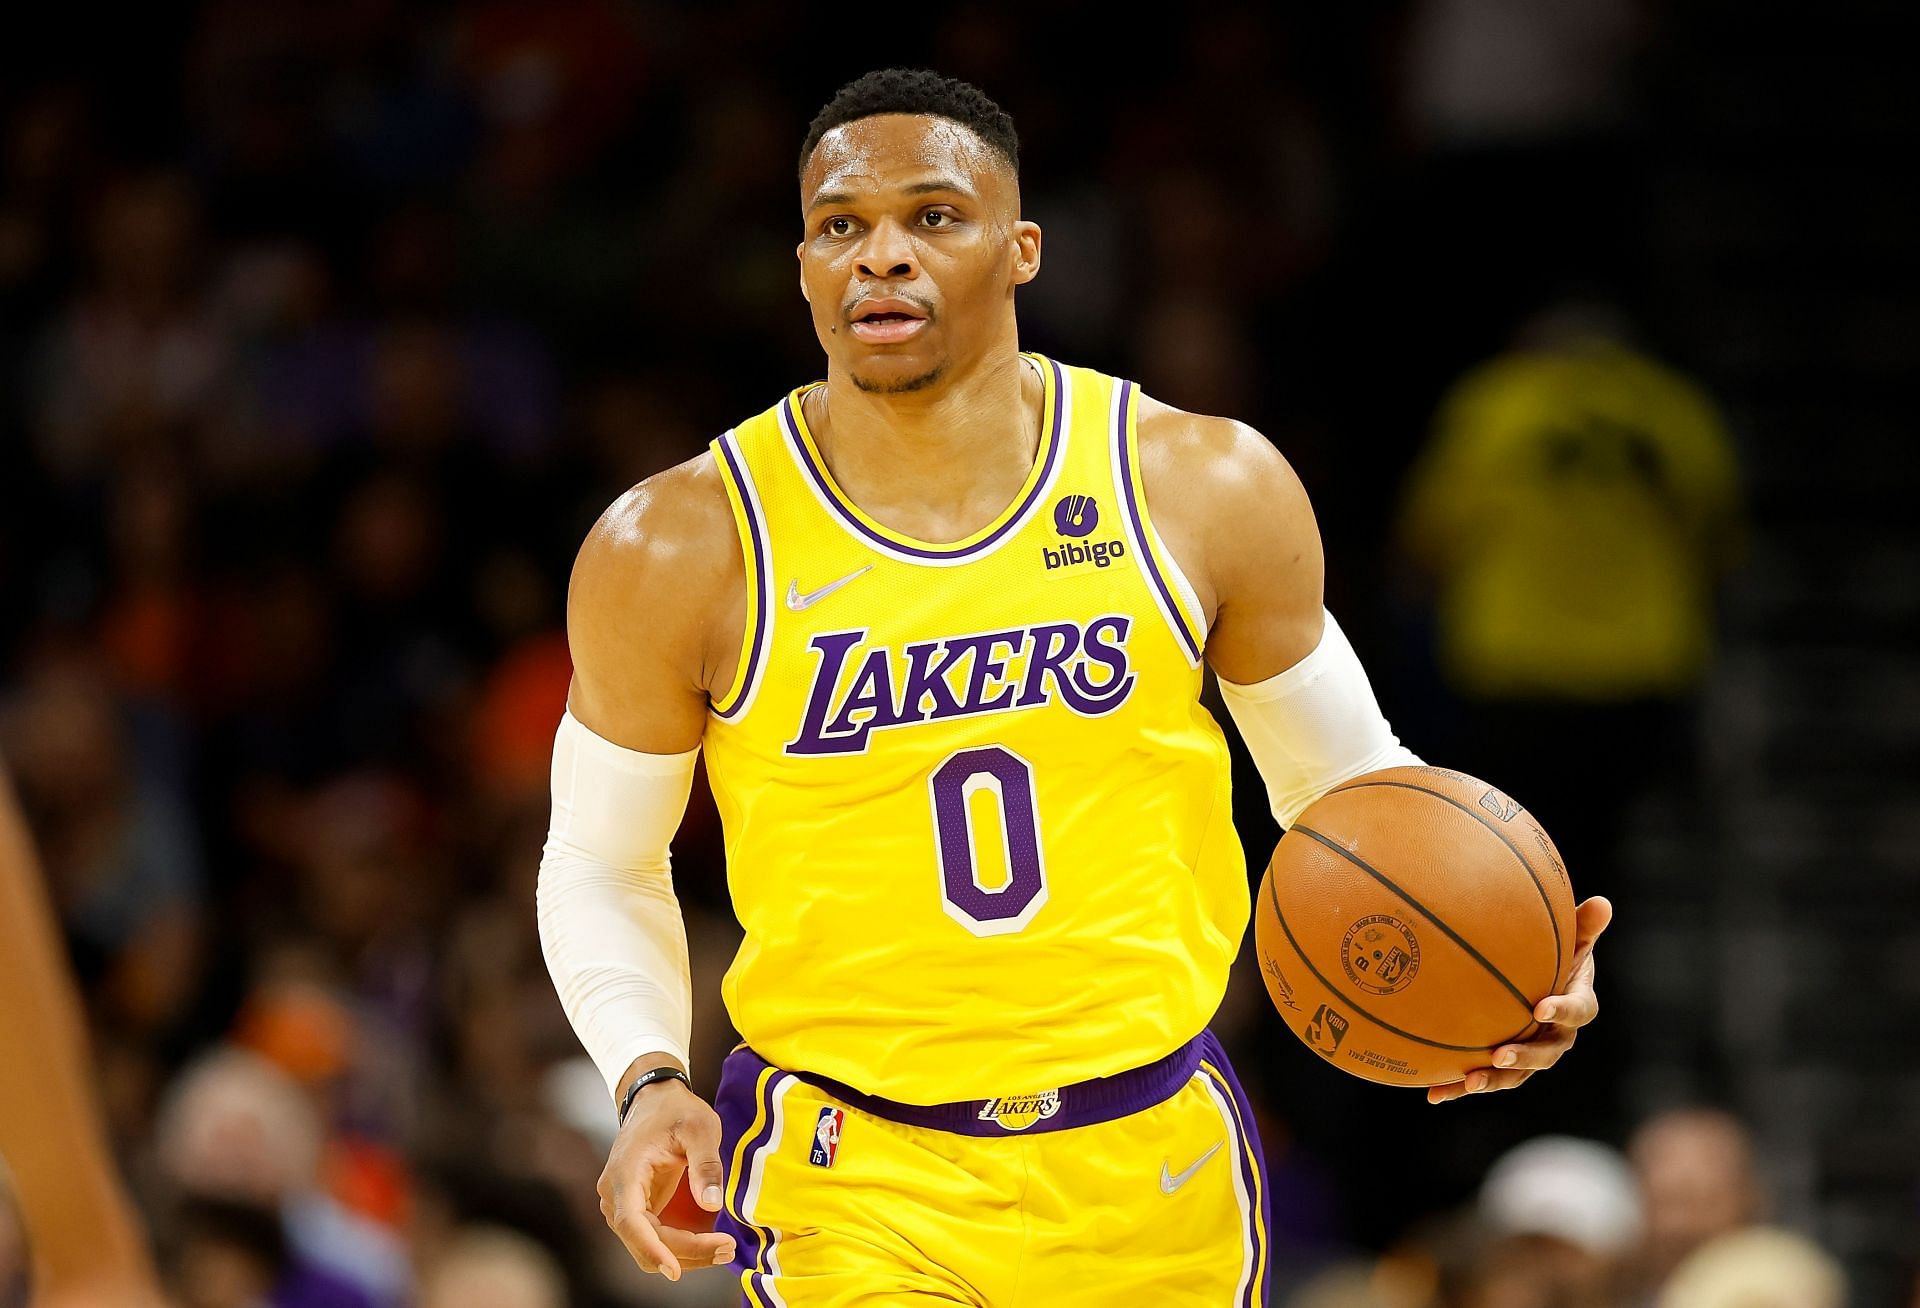 Russell Westbrook of the LA Lakers handles the ball.